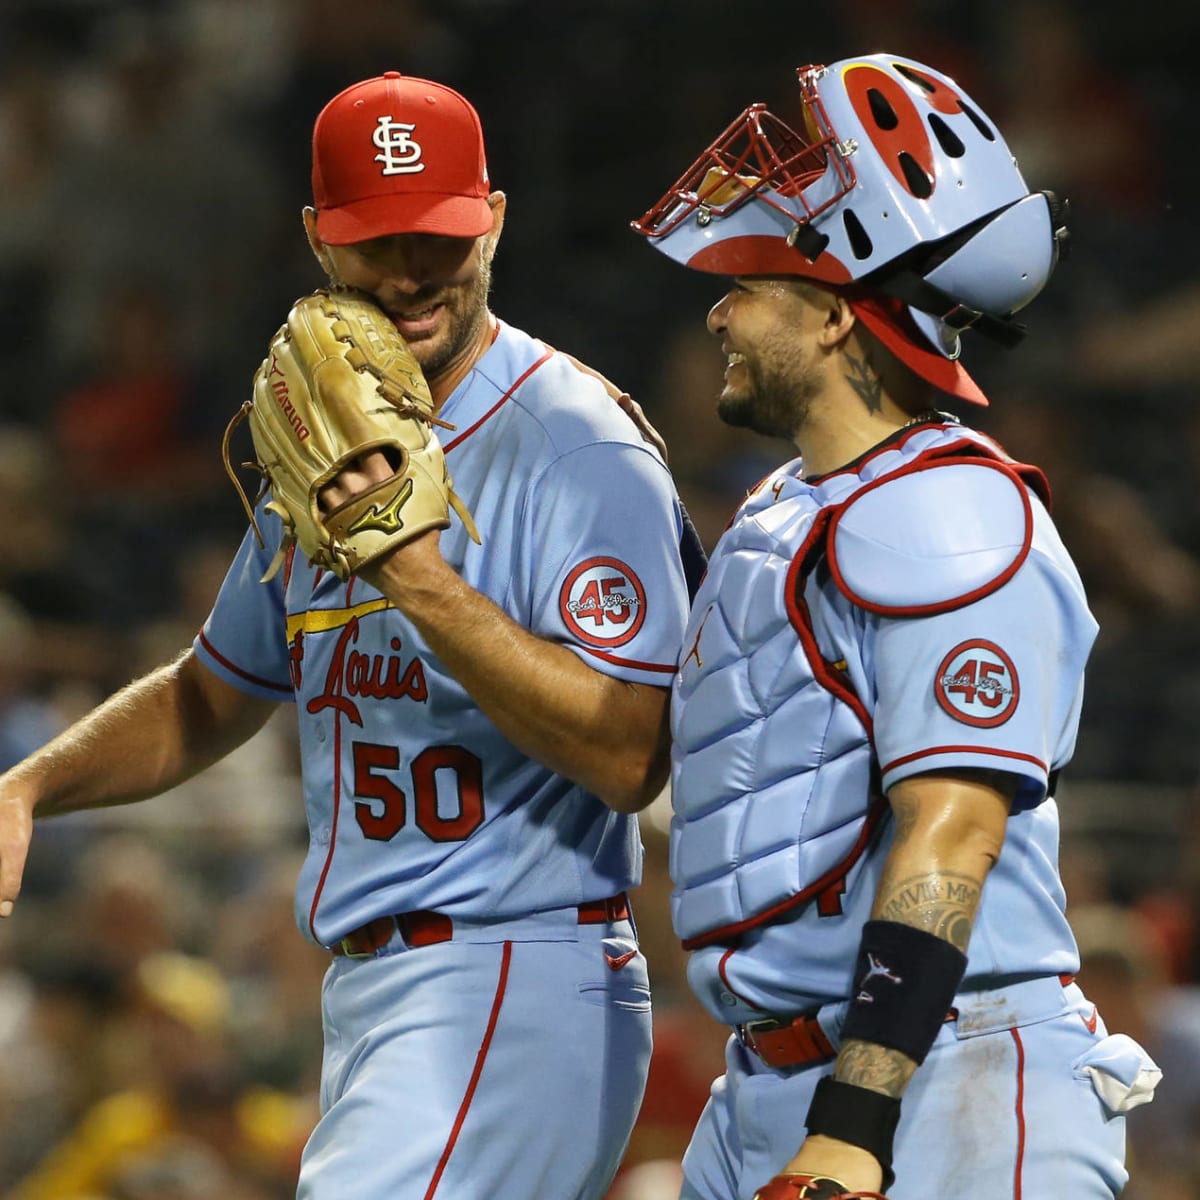 Adam Wainwright wishes a “Despicable” Halloween - A Hunt and Peck